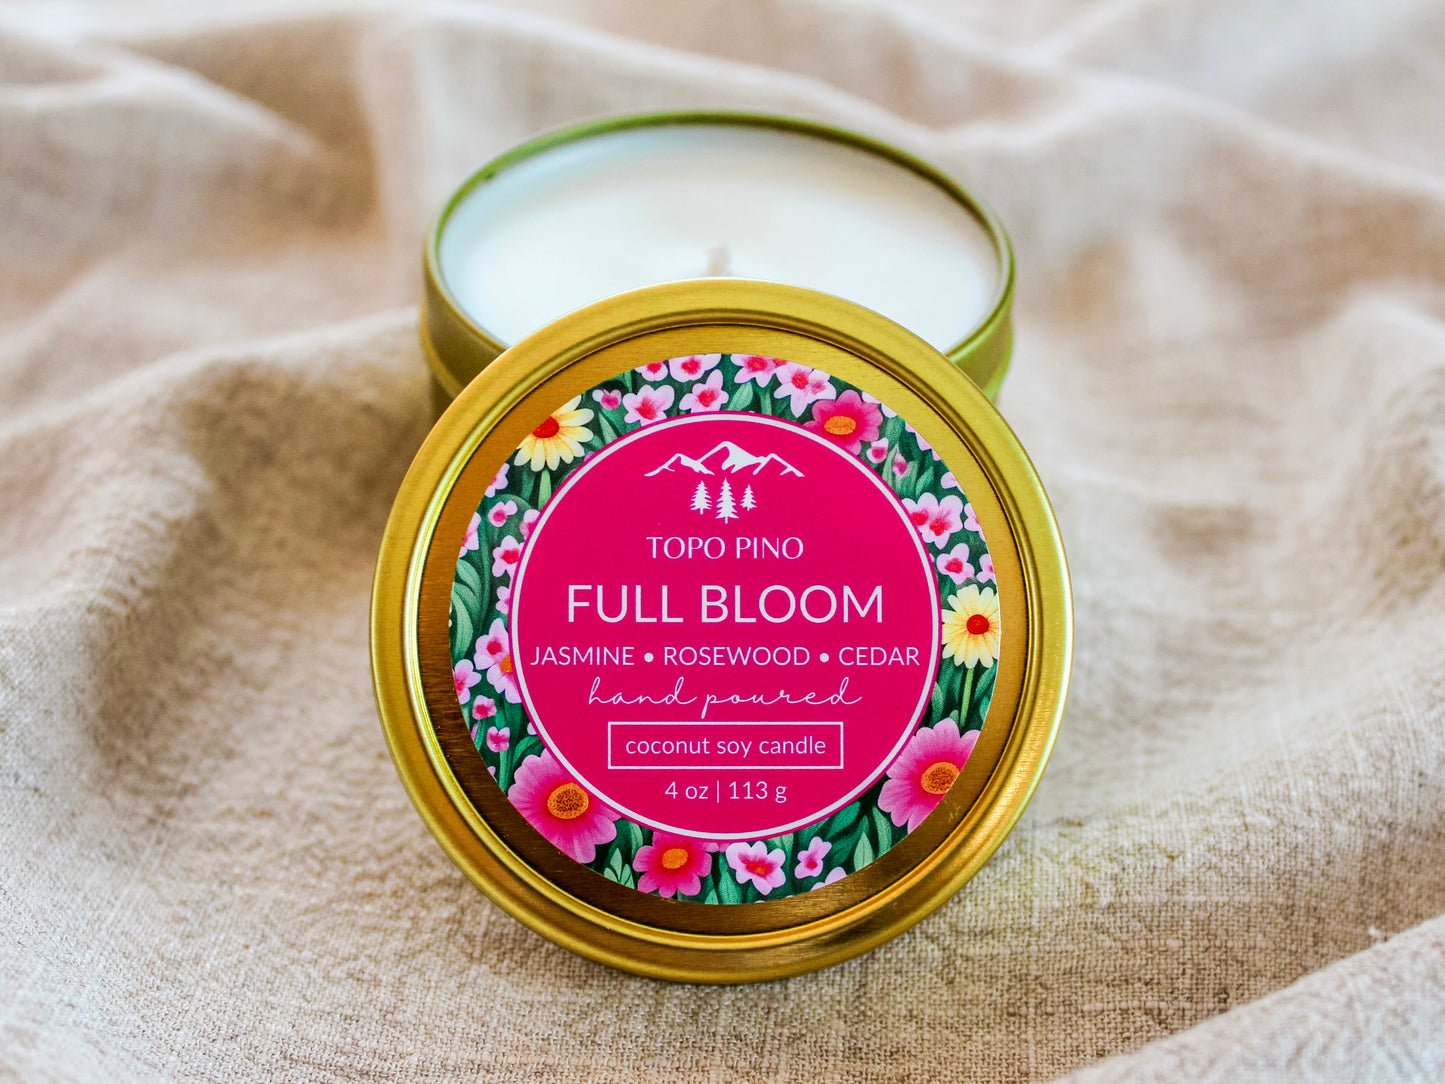 Limited Edition Full Bloom Candle